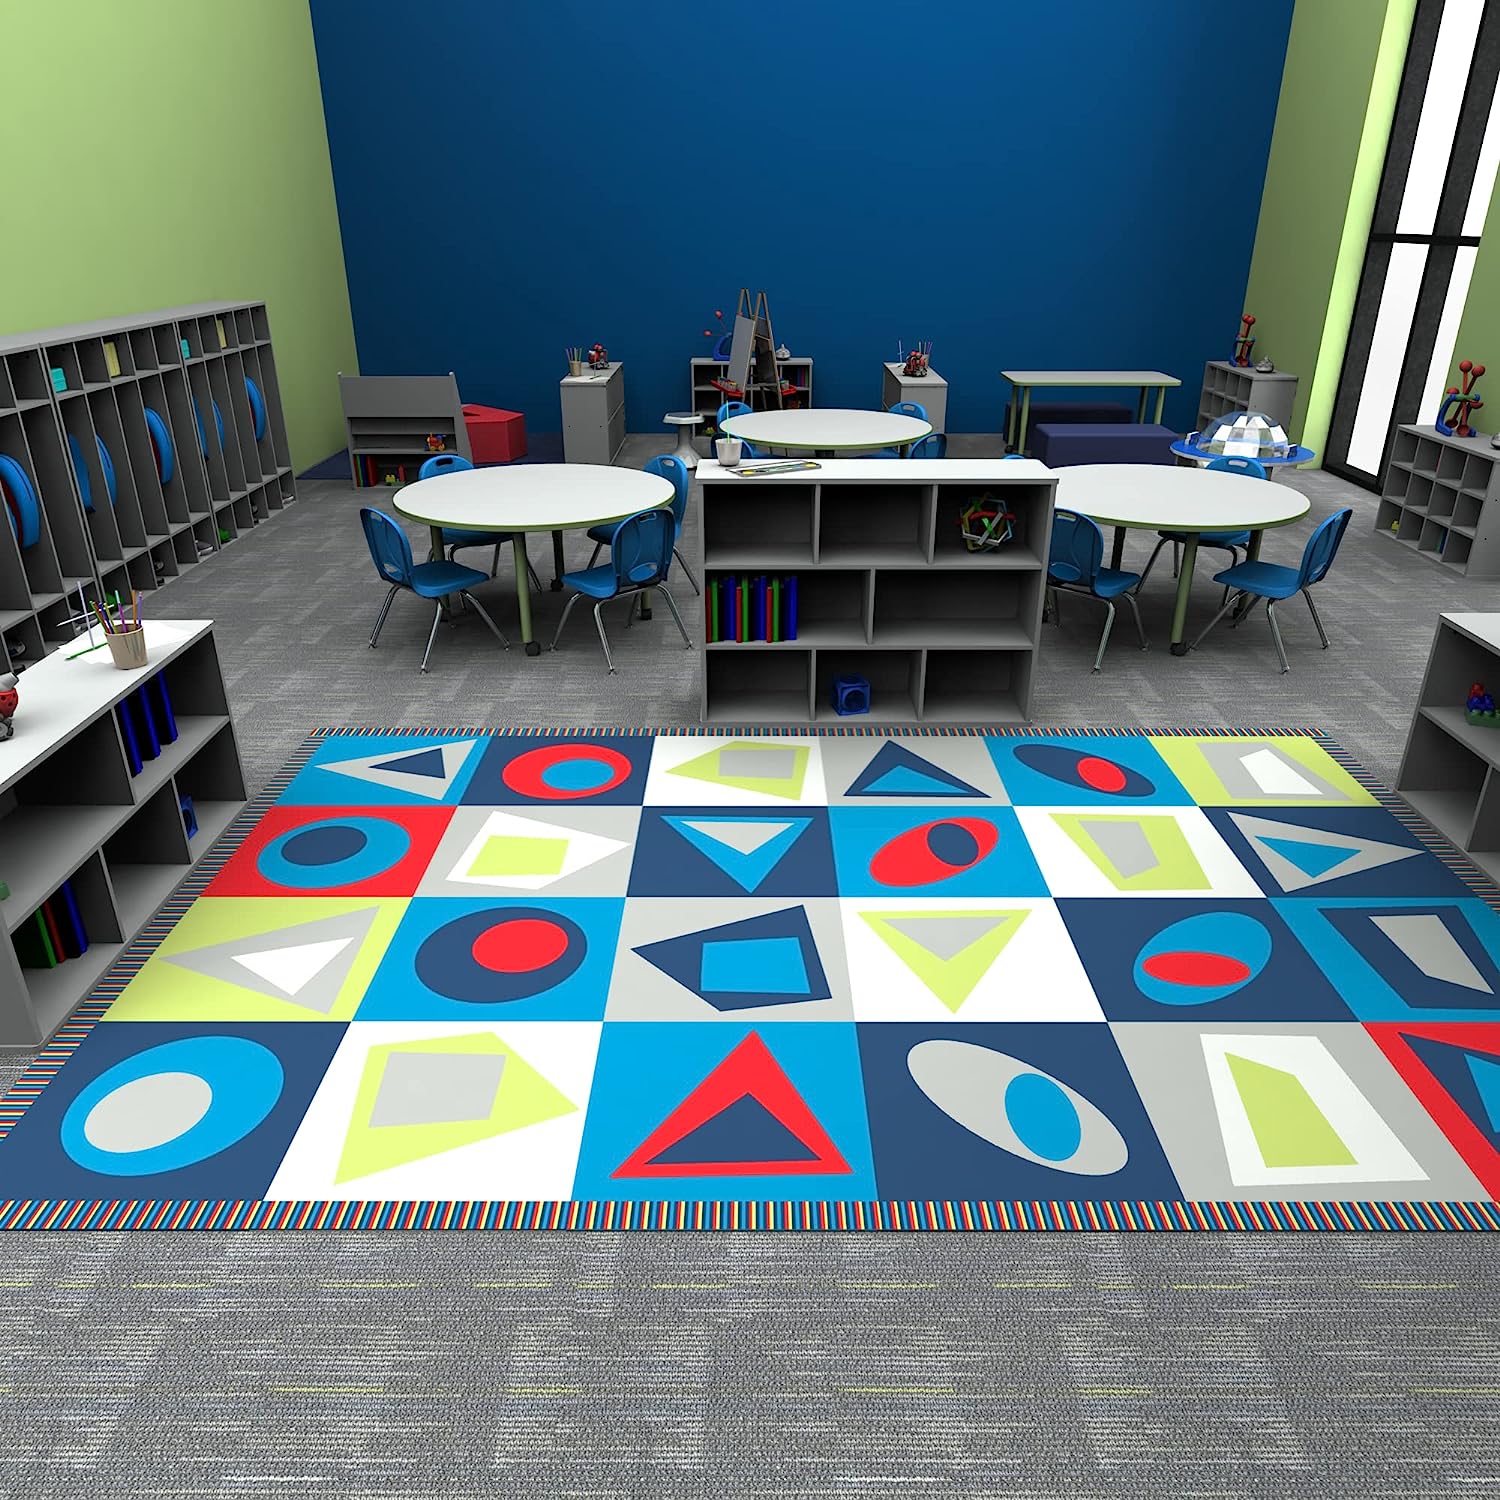 15 Best Classroom Storage For 2023